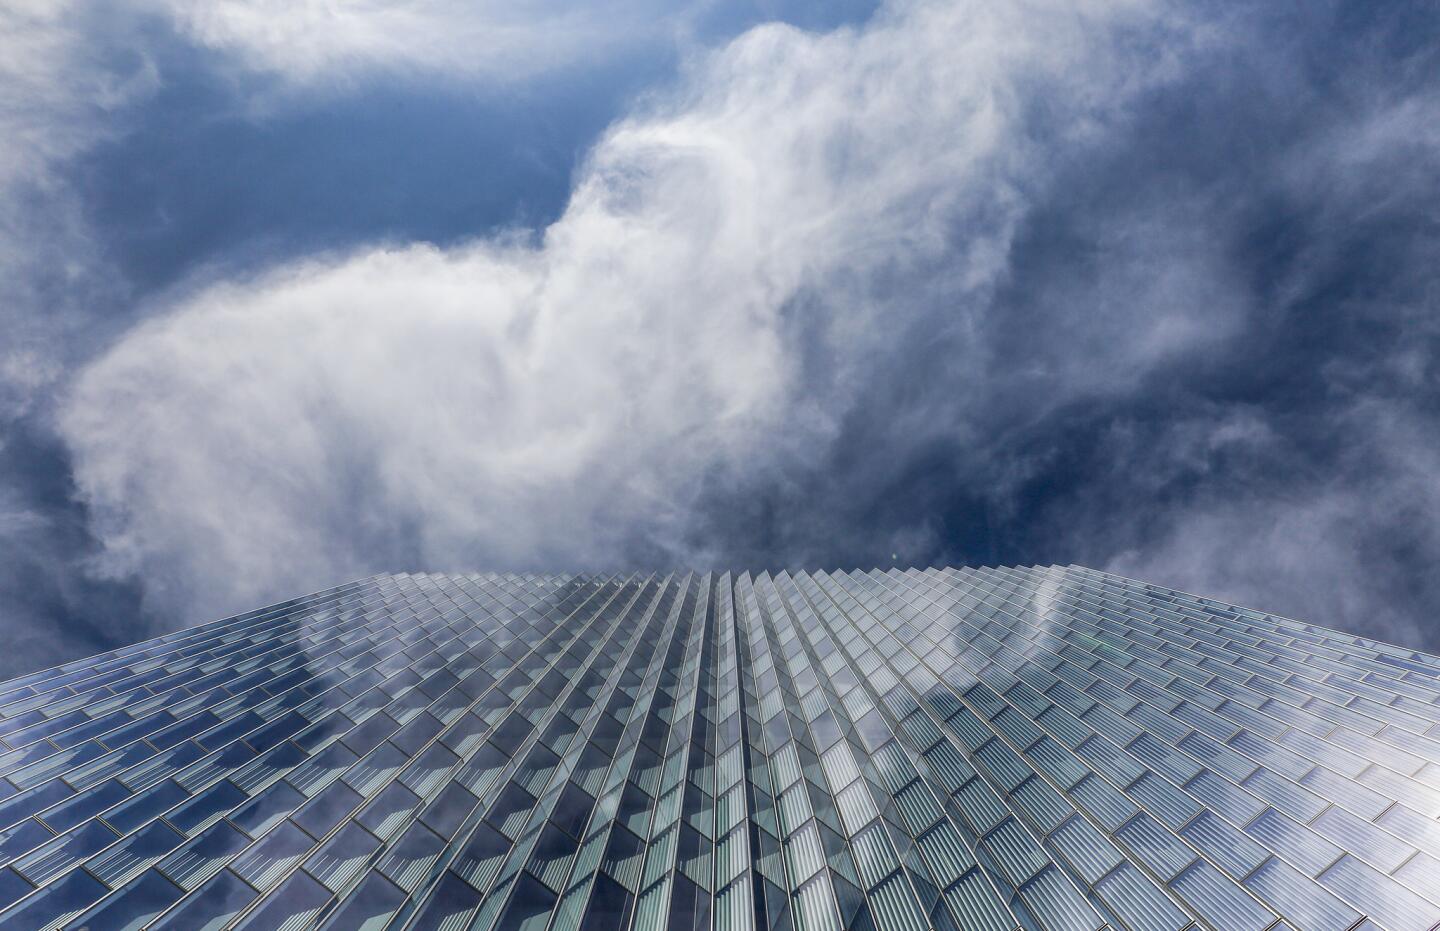 Clouds billow above the new federal courthouse in downtown L.A.'s civic center.